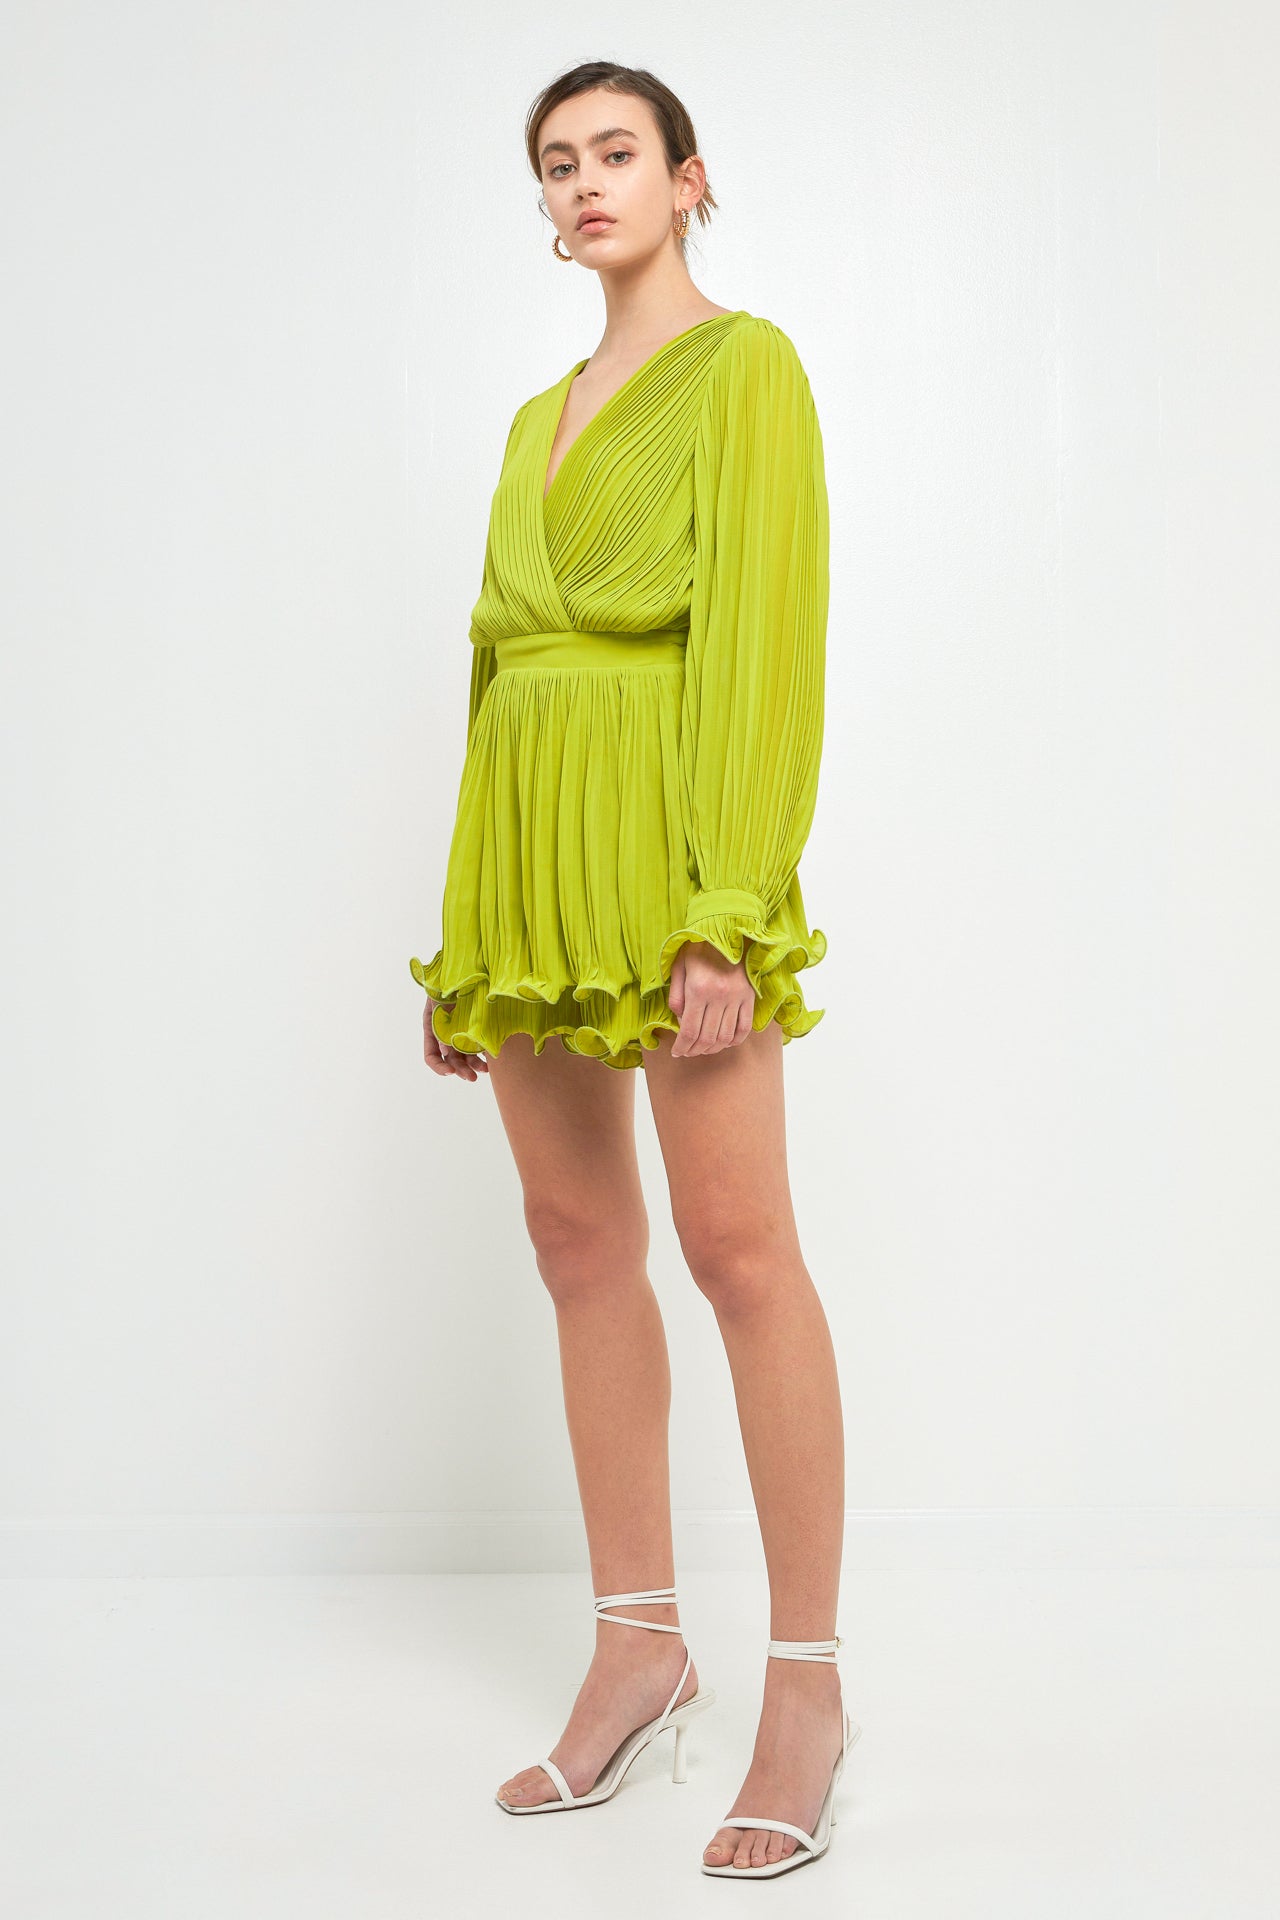 ENDLESS ROSE - Pleated Long-Sleeve Romper - ROMPERS available at Objectrare